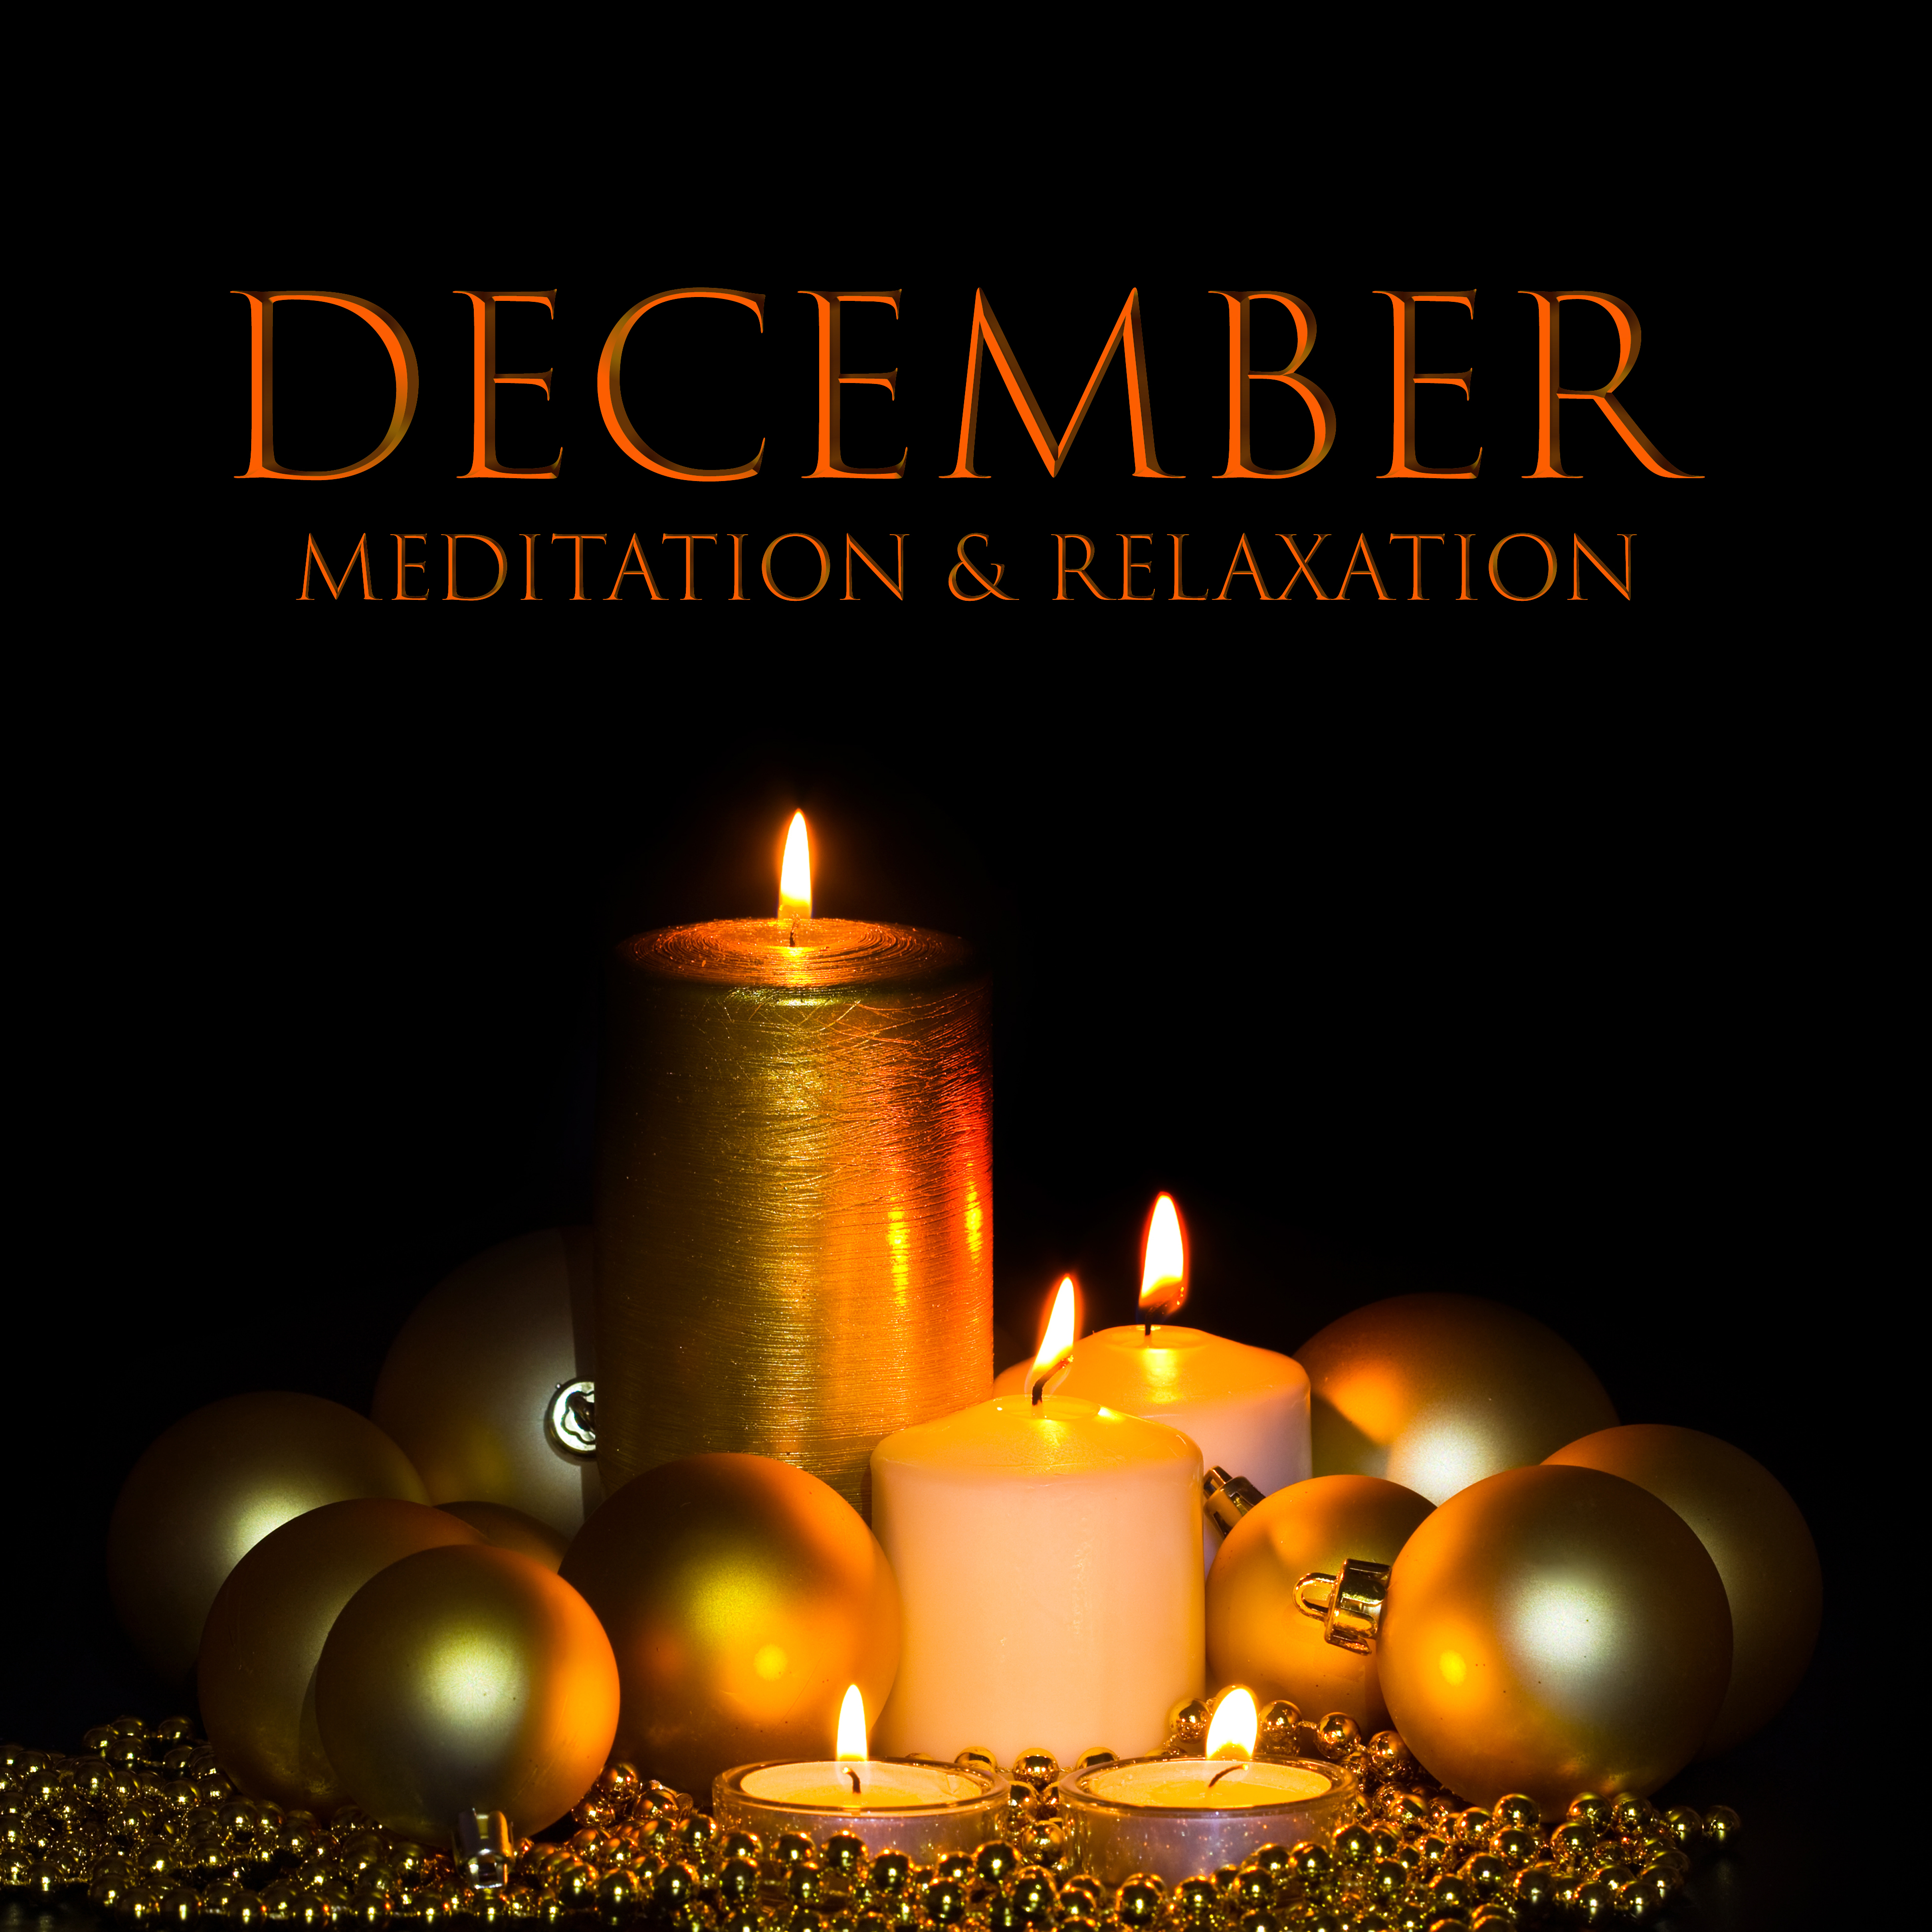 December Meditation  Relaxation  Nature Sounds for Yoga Relaxation, Spiritual Tracks for Meditation, Healing Music to Calm Down